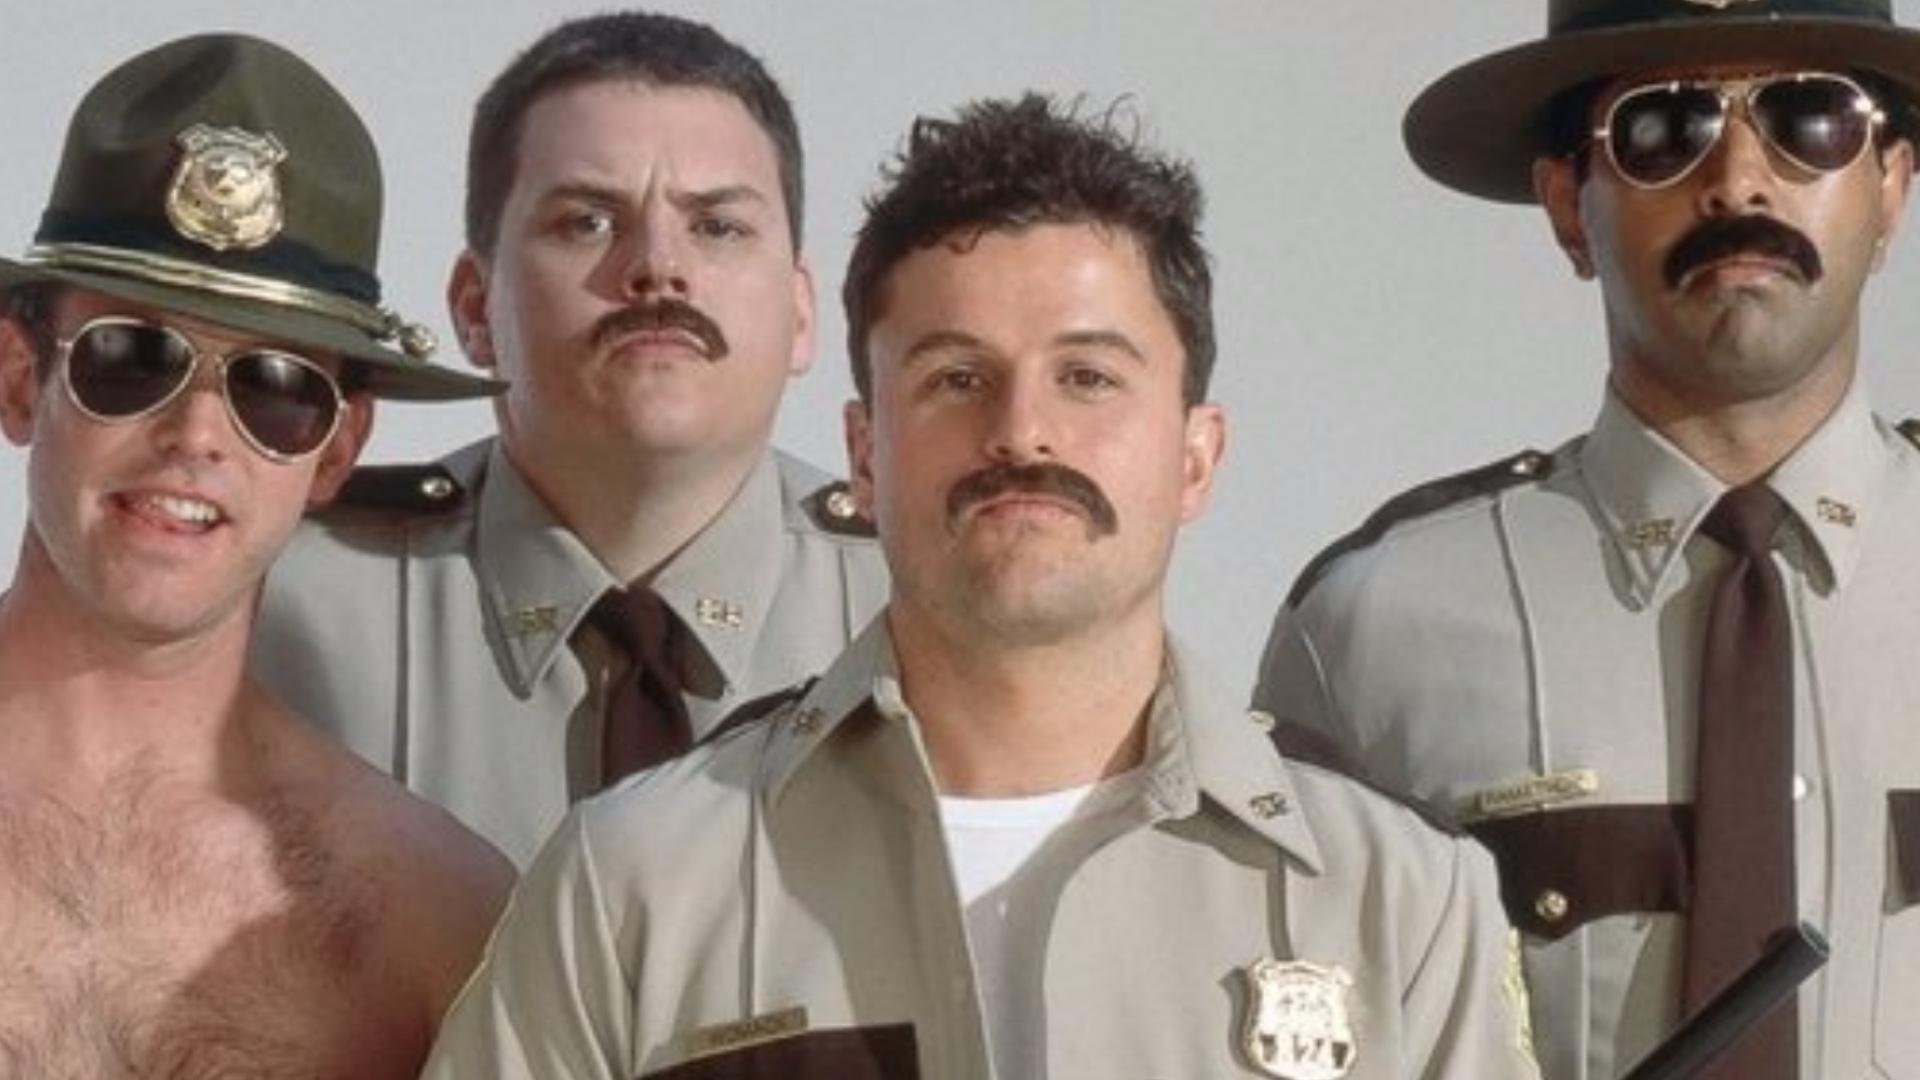 The Team Behind SUPER TROOPERS is Now Developing a Fireman.